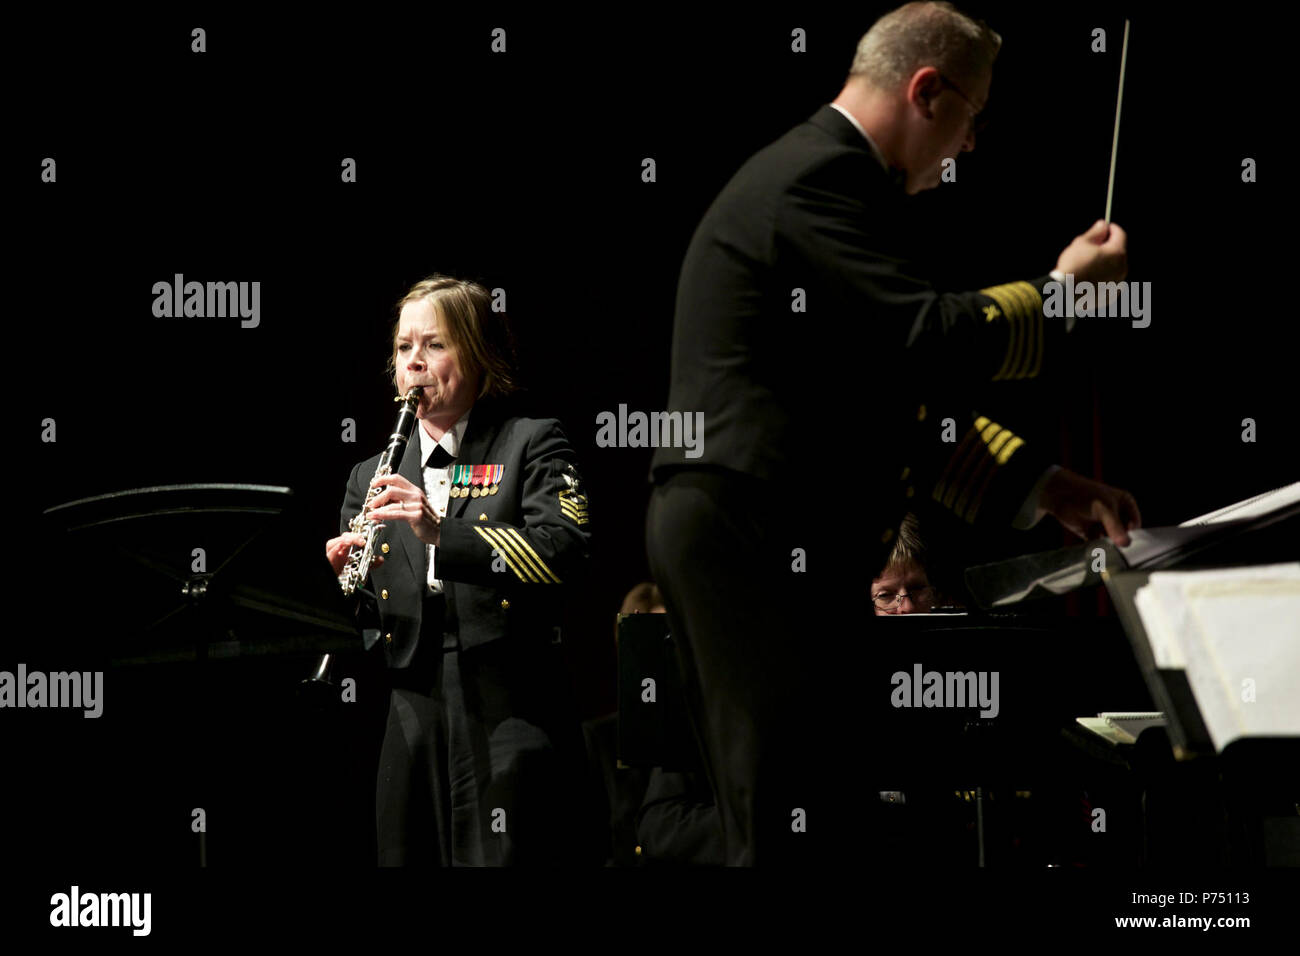 NORTH CHARLESTON, S.C. (March 9, 2015) Senior Chief Musician Laura Grantier, from Denham Springs, La., performs with the U.S. Navy Band during a concert at the Rose Maree Meyers Theater for the Performing Arts in North Charleston, S.C. The U.S. Navy Band is touring the Southeast United States, with performances in 32 cities. Stock Photo